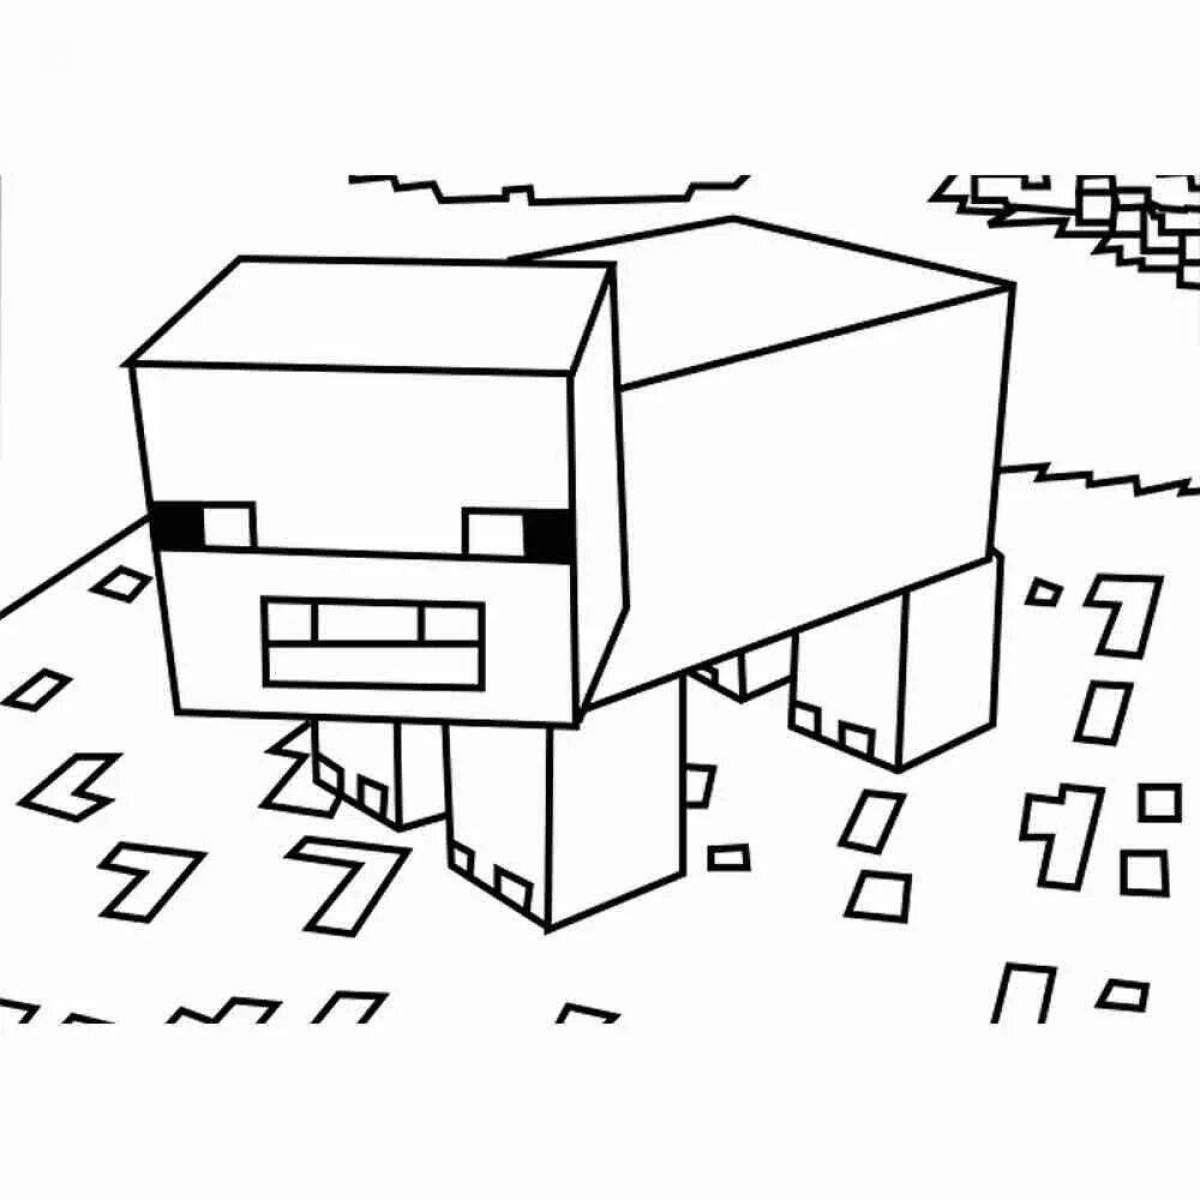 Playful minecraft portal coloring page